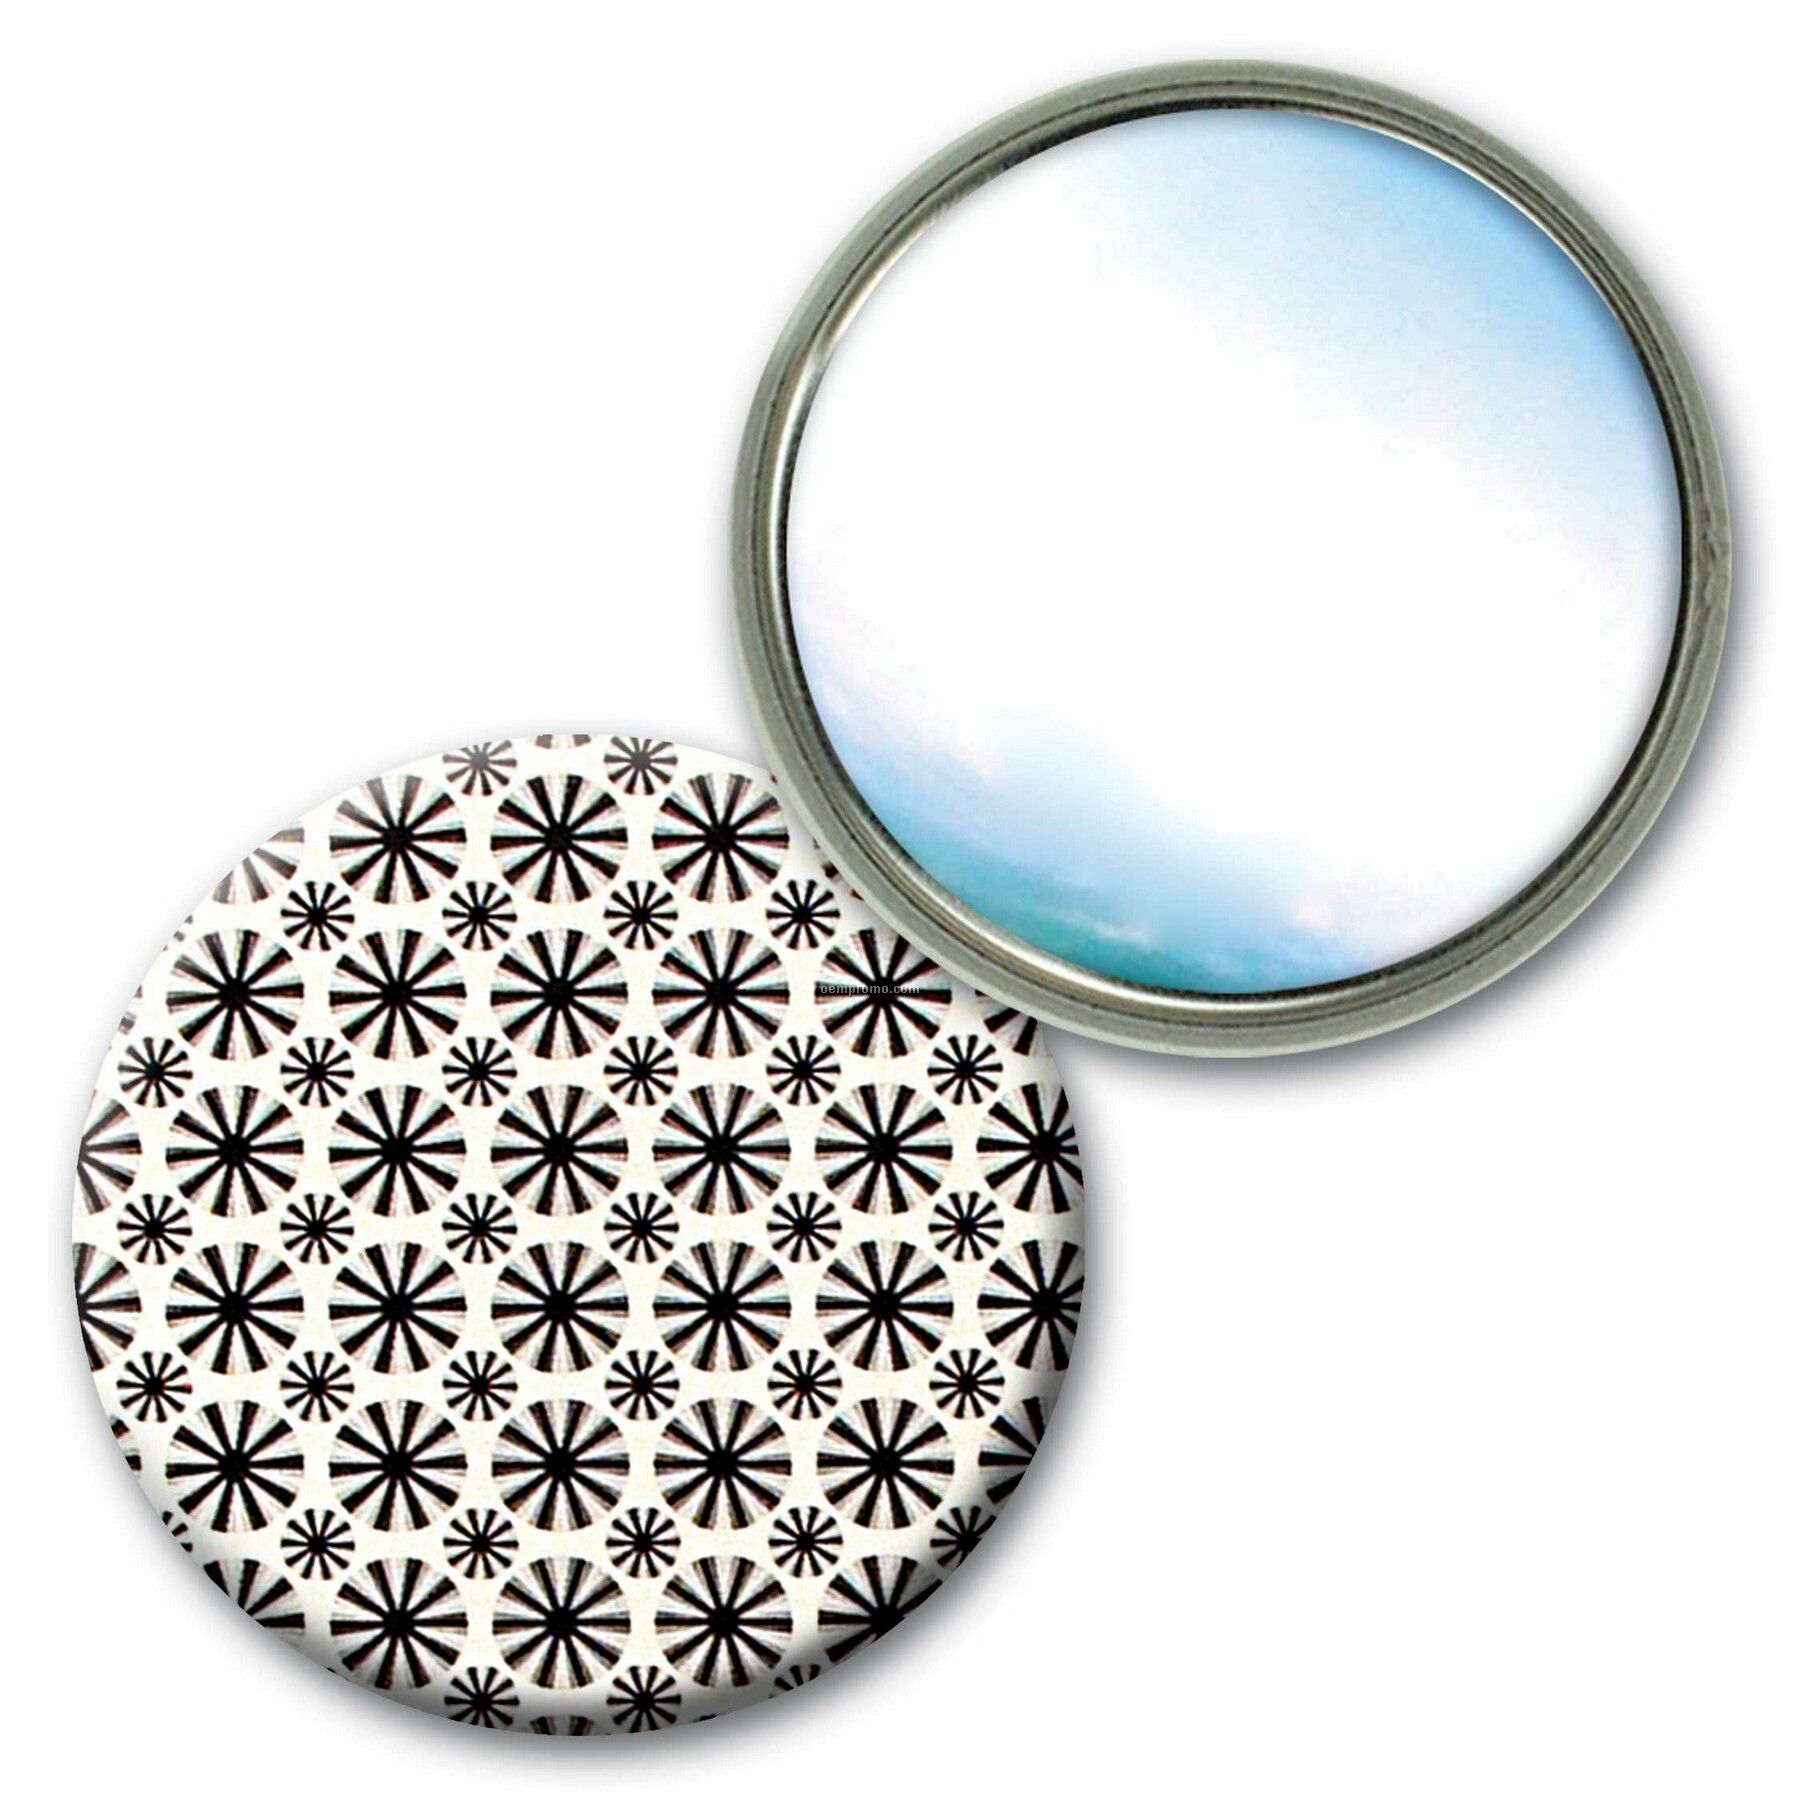 Compact Mirror Lenticular Animated Wheels Effect ( Blank)